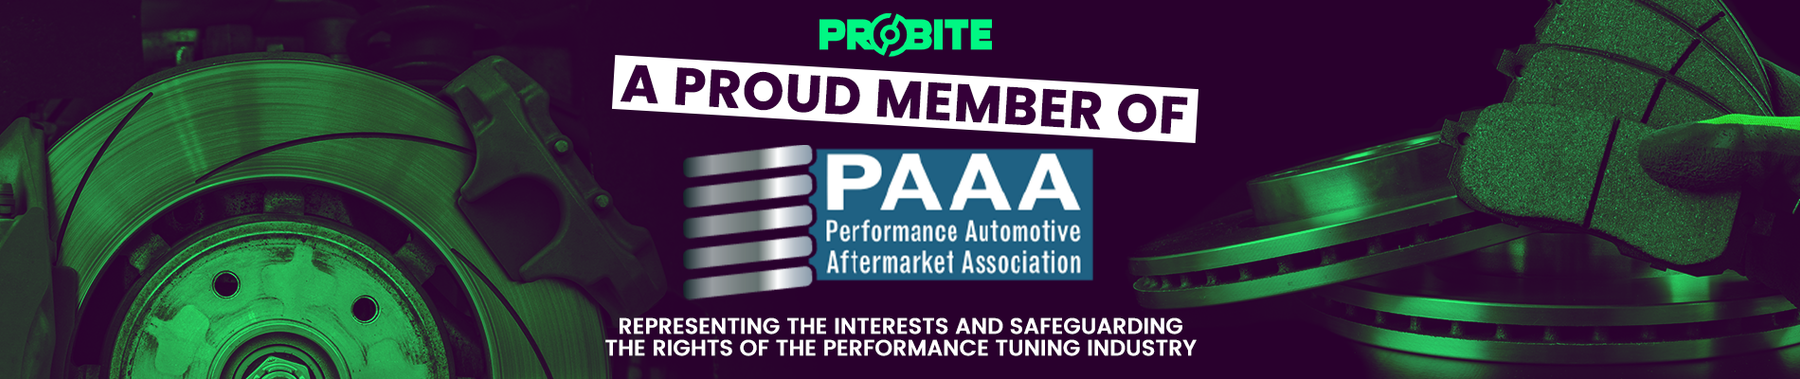 Probite approved by the PAAA